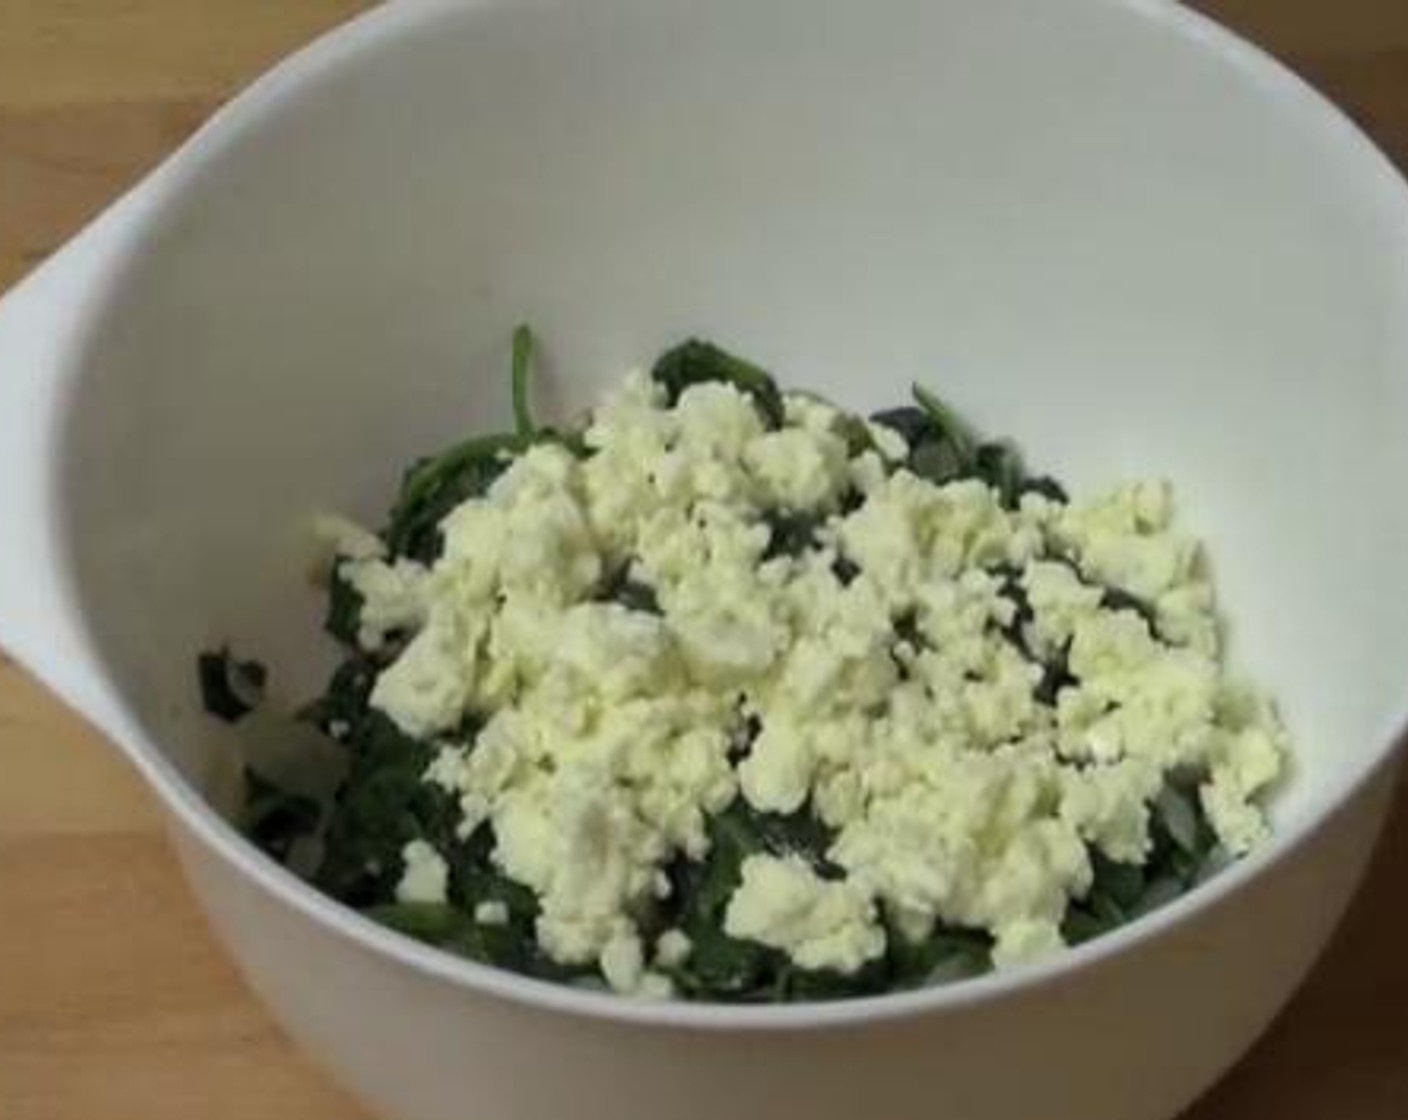 step 3 Transfer the spinach into a mixing bowl, and to that add the Feta Cheese (2/3 cup), juice from Lemon (1), Salt (to taste), and Ground Black Pepper (to taste). Mix everything well. Set aside while you work on the pastry.